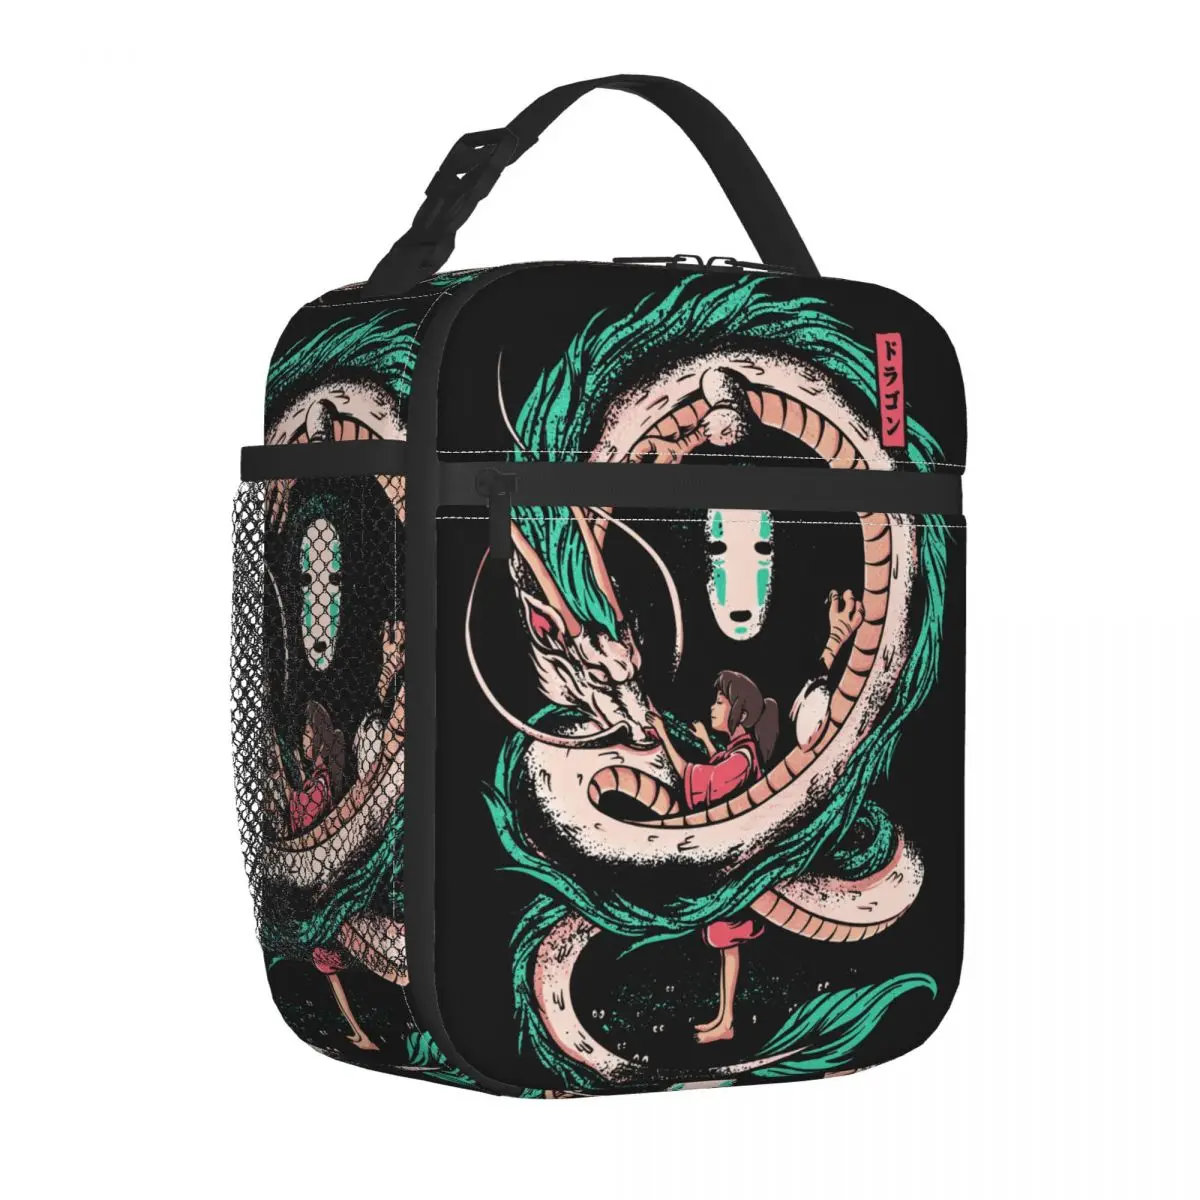 

The Girl And The Dragon Insulated Lunch Bag Cooler Bag Meal Container Spirited Away Large Tote Lunch Box Food Handbags Outdoor